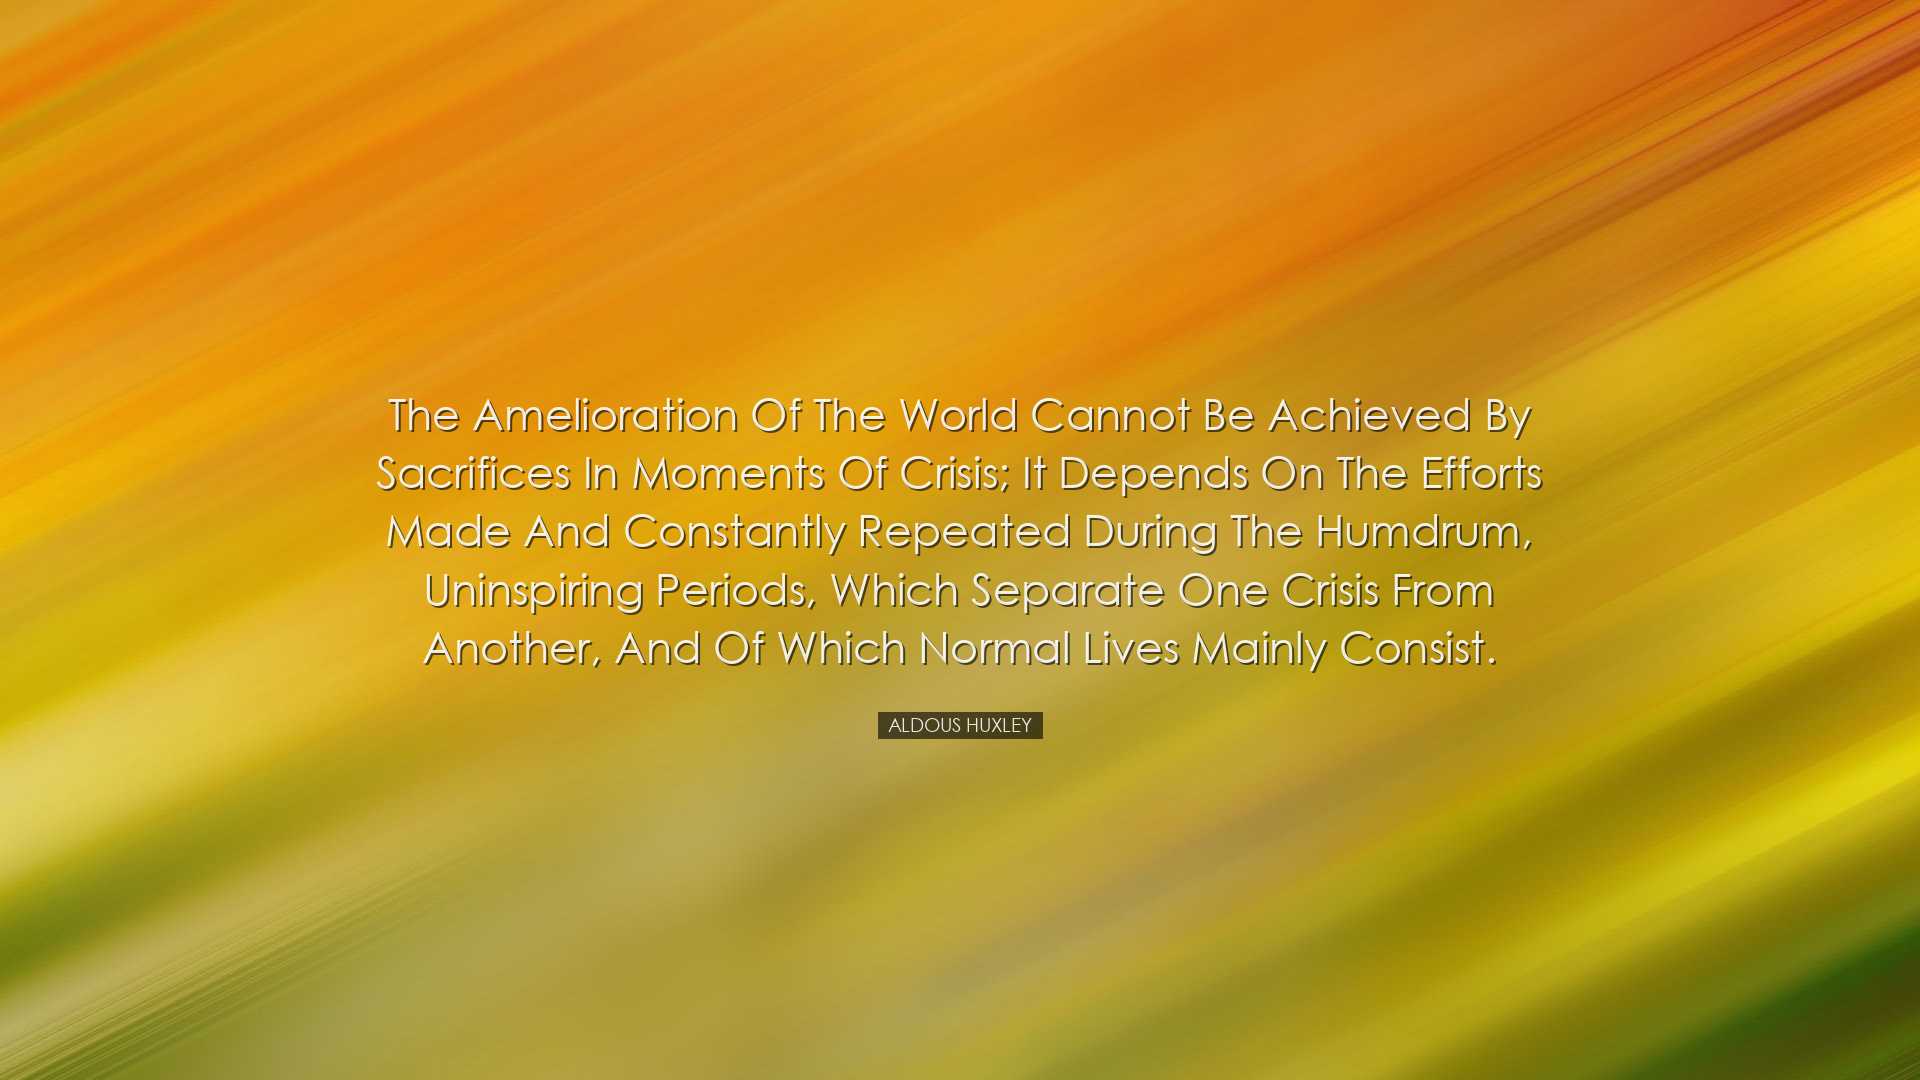 The amelioration of the world cannot be achieved by sacrifices in